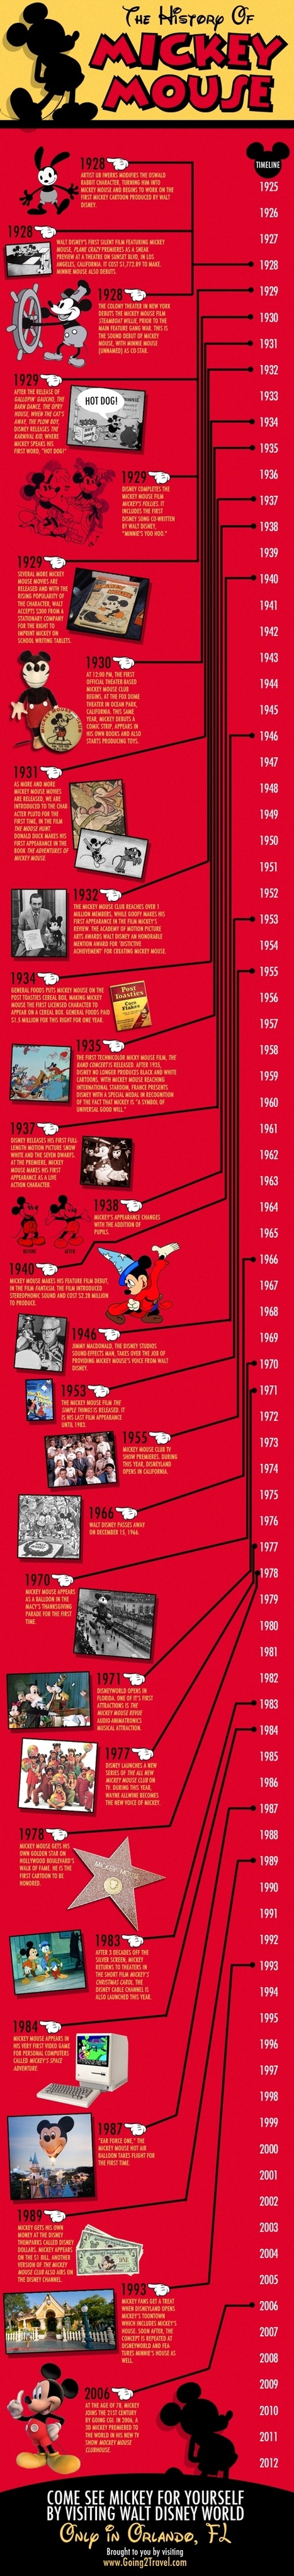 Cool Infographics - Blog - The History of Mickey Mouse | Public Relations & Social Marketing Insight | Scoop.it